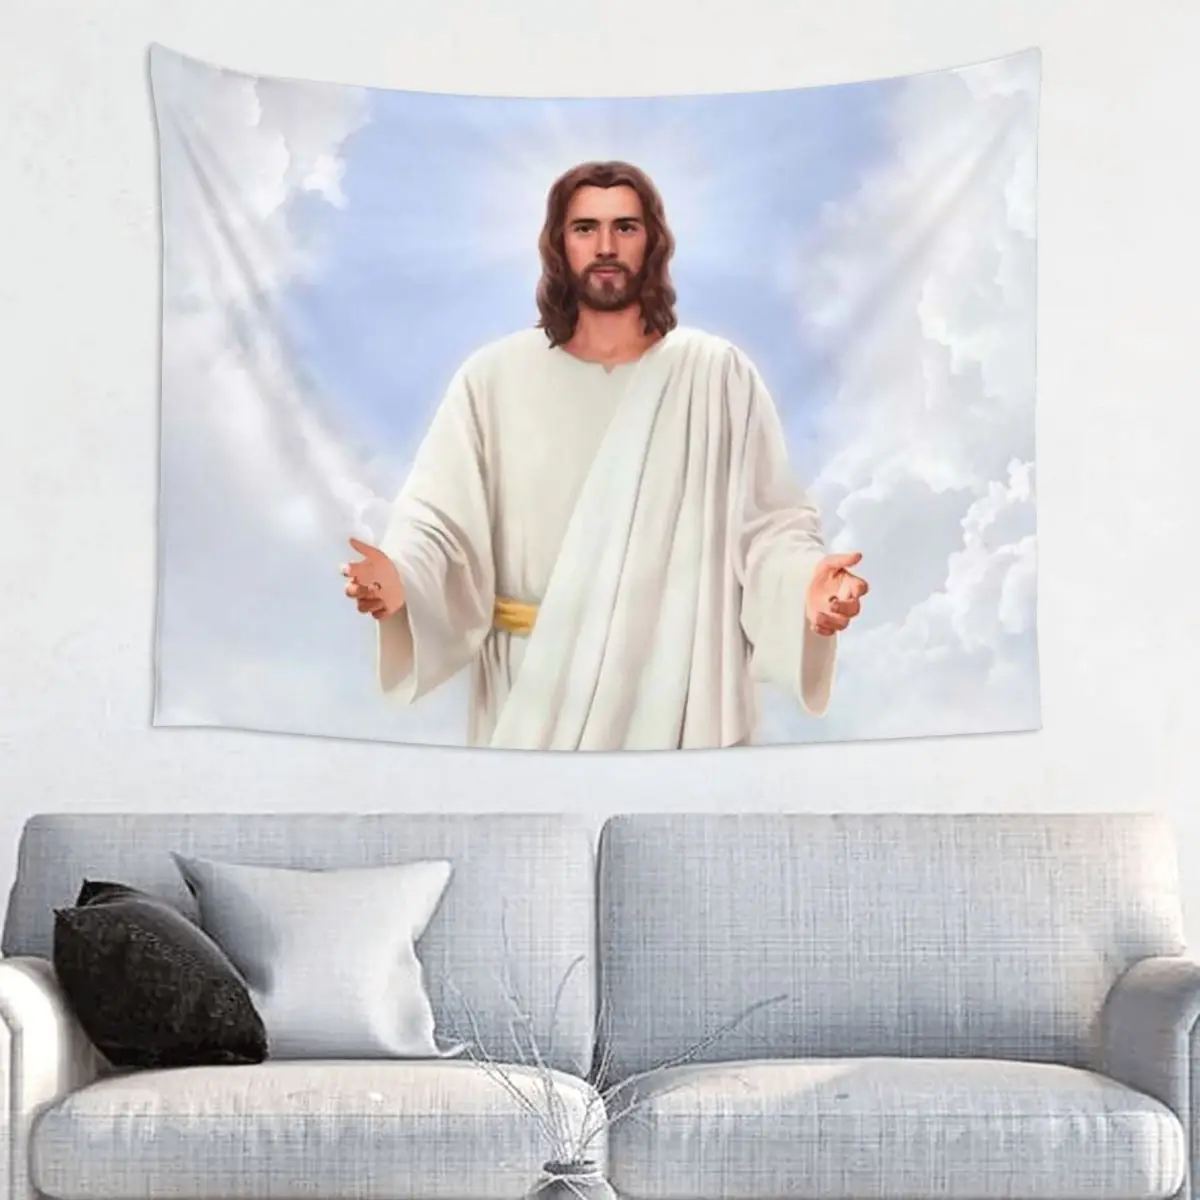 

Christian Tapestry Wall Hanging Print Fabric Tapestries Jesus Christ God Bless INS Decoration Room Home Decor Yoga Mat